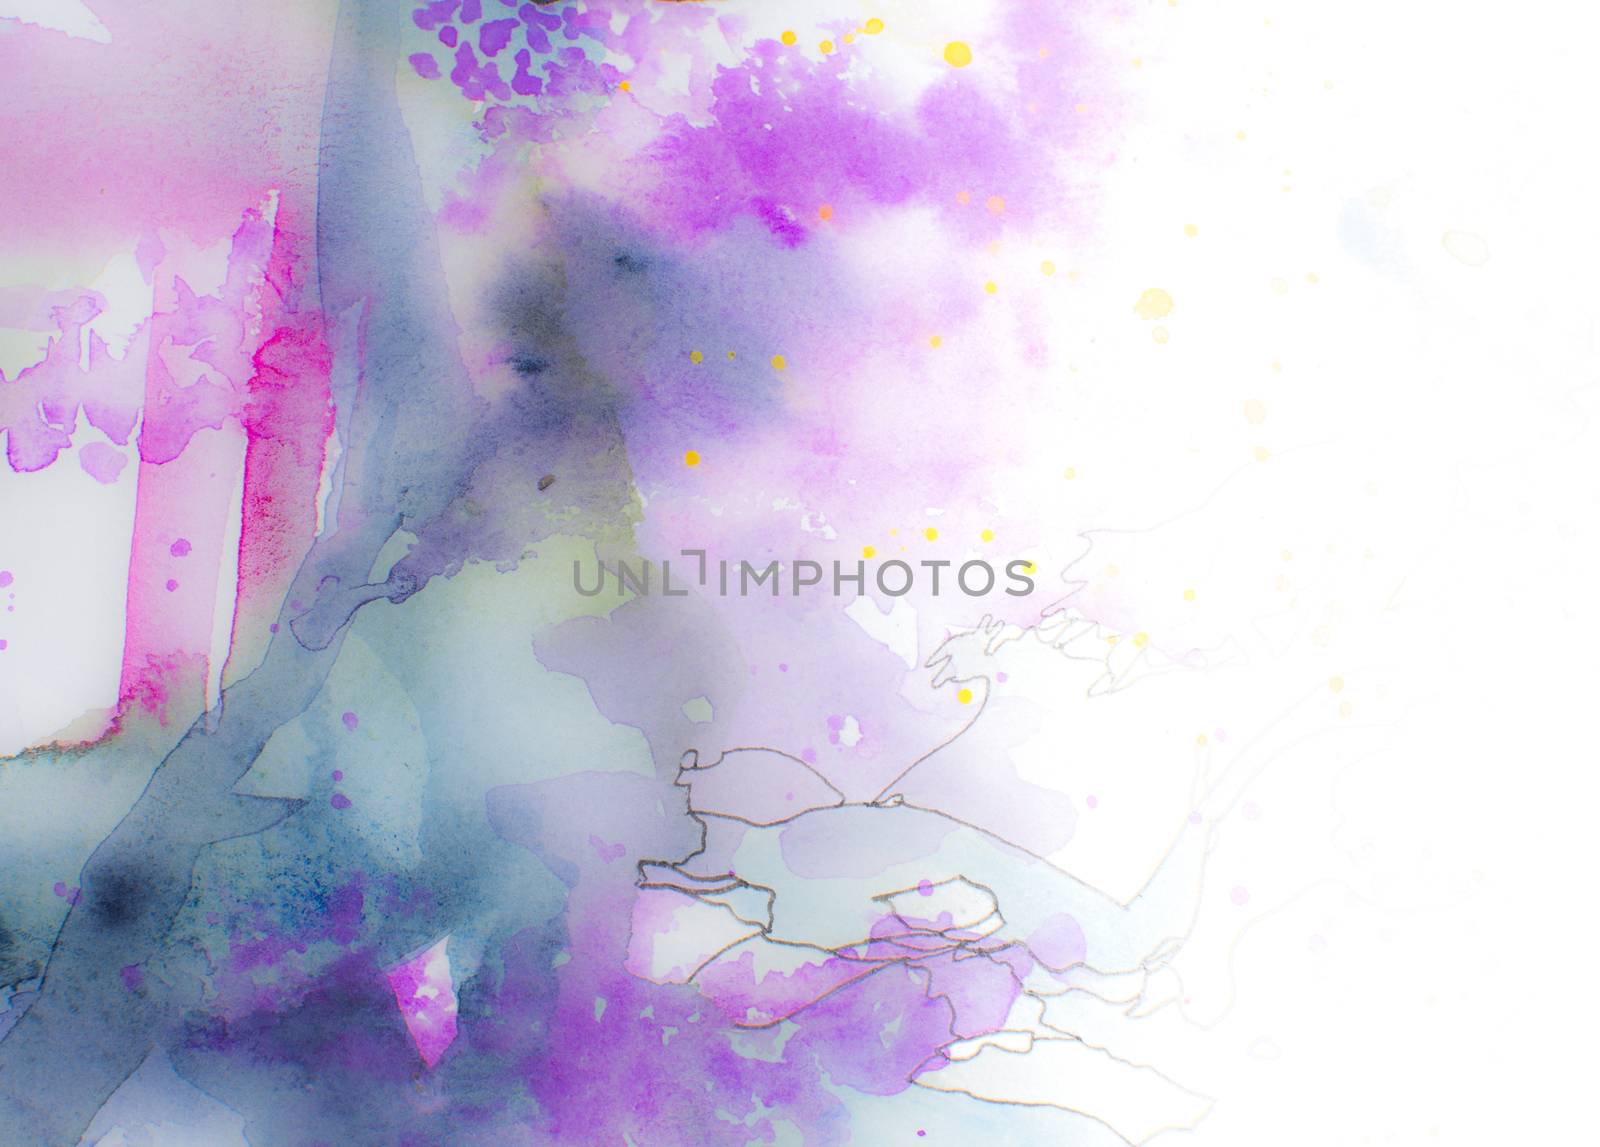 Colorful watercolor background or margin in soft pastel shades of pink, blue and purple with some ink details. Fading out into isolated white on the right.